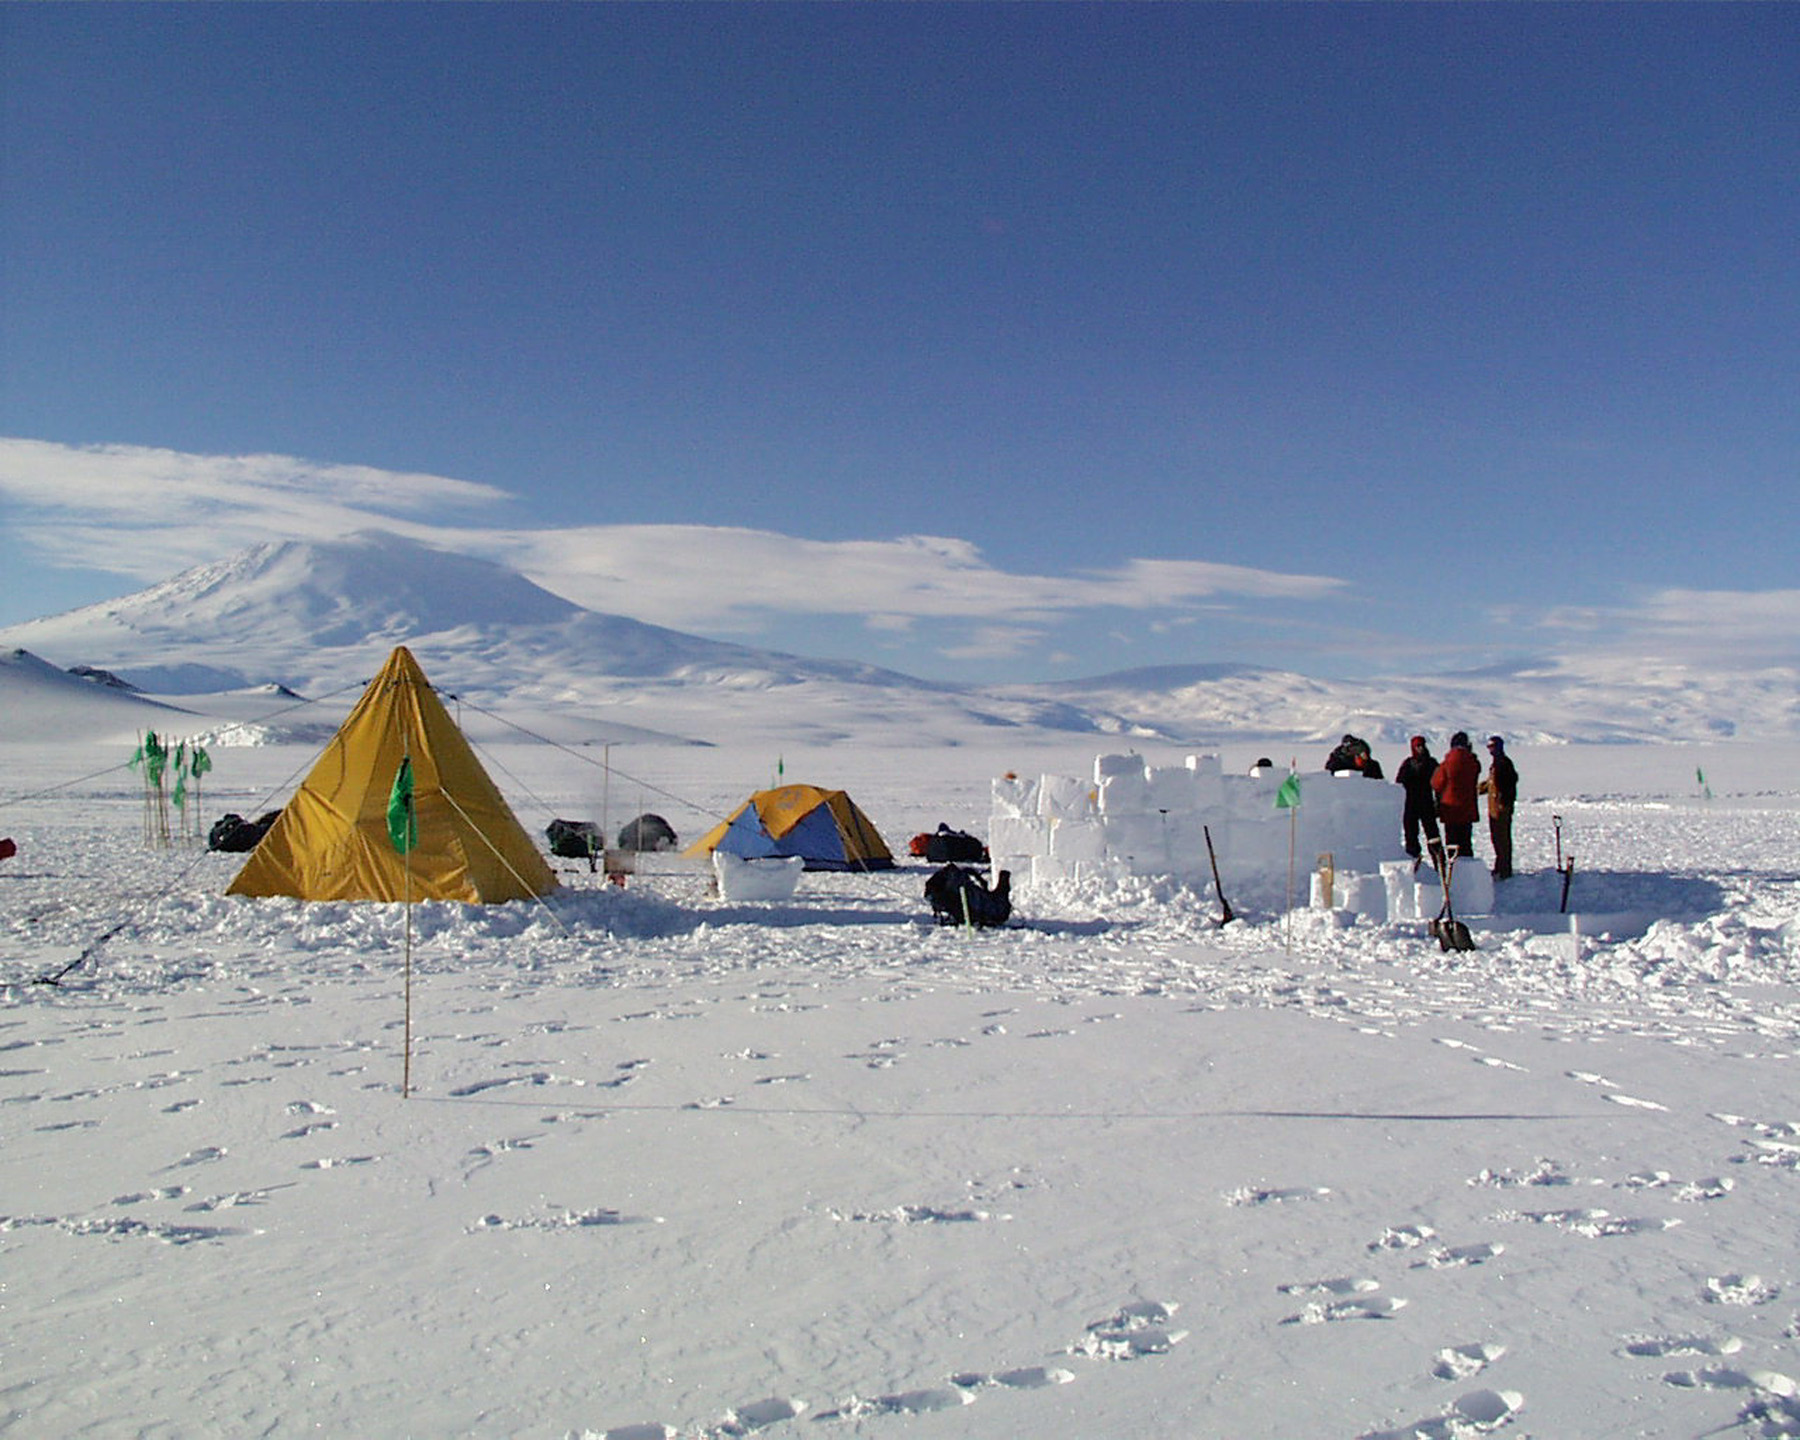 A snow camp with yellow tent and a wall built of blocks of snow.